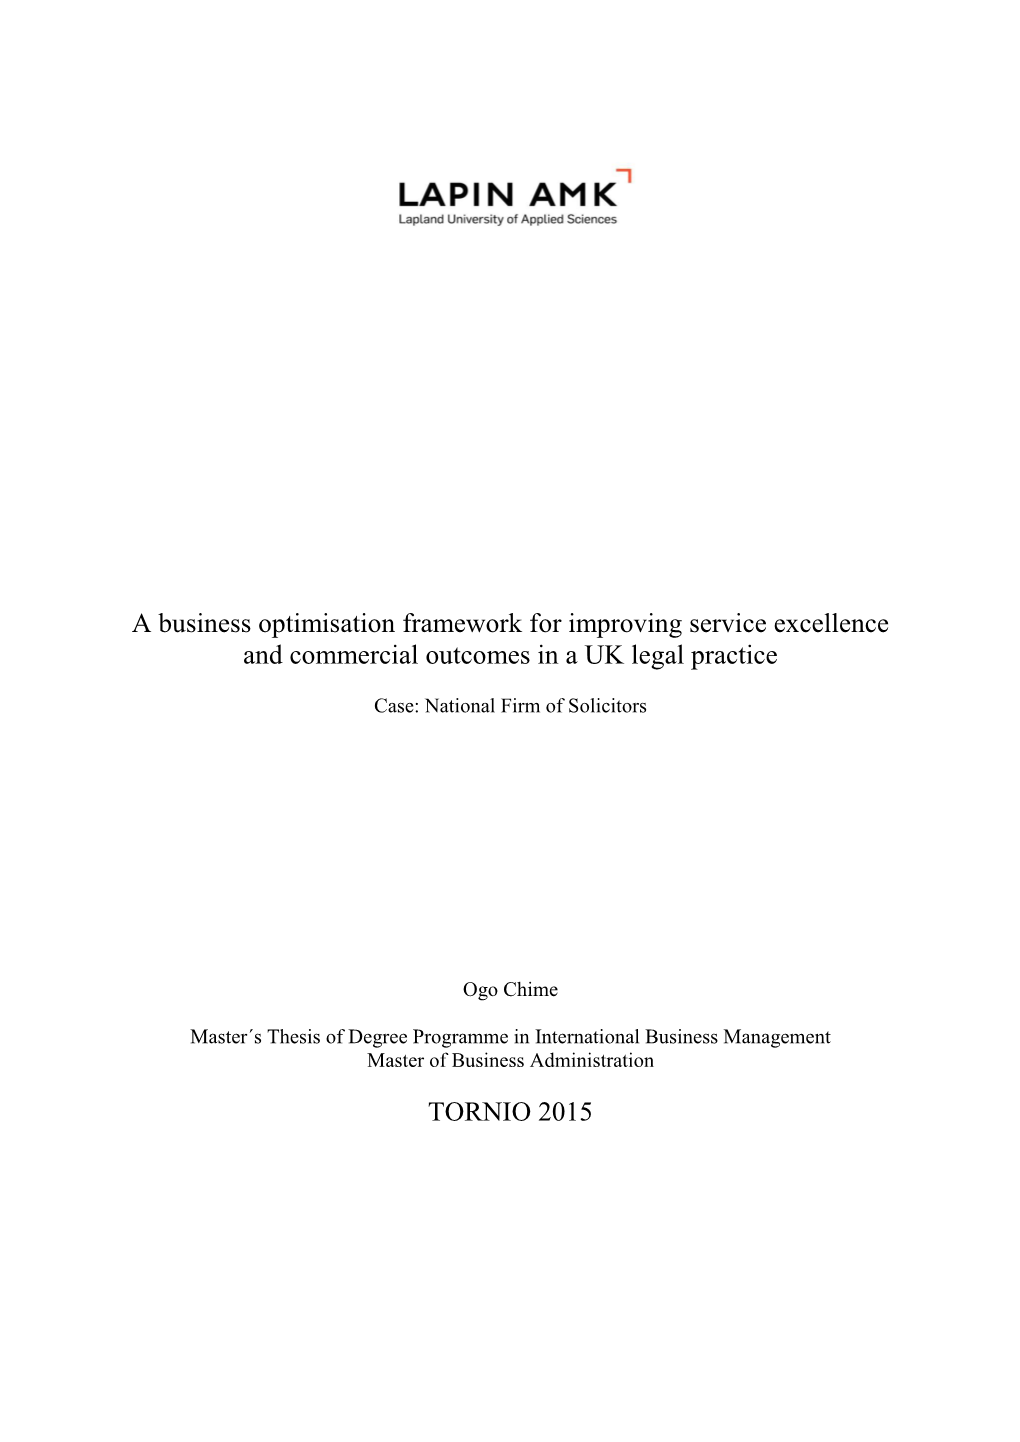 A Business Optimisation Framework for Improving Service Excellence and Commercial Outcomes in a UK Legal Practice TORNIO 2015